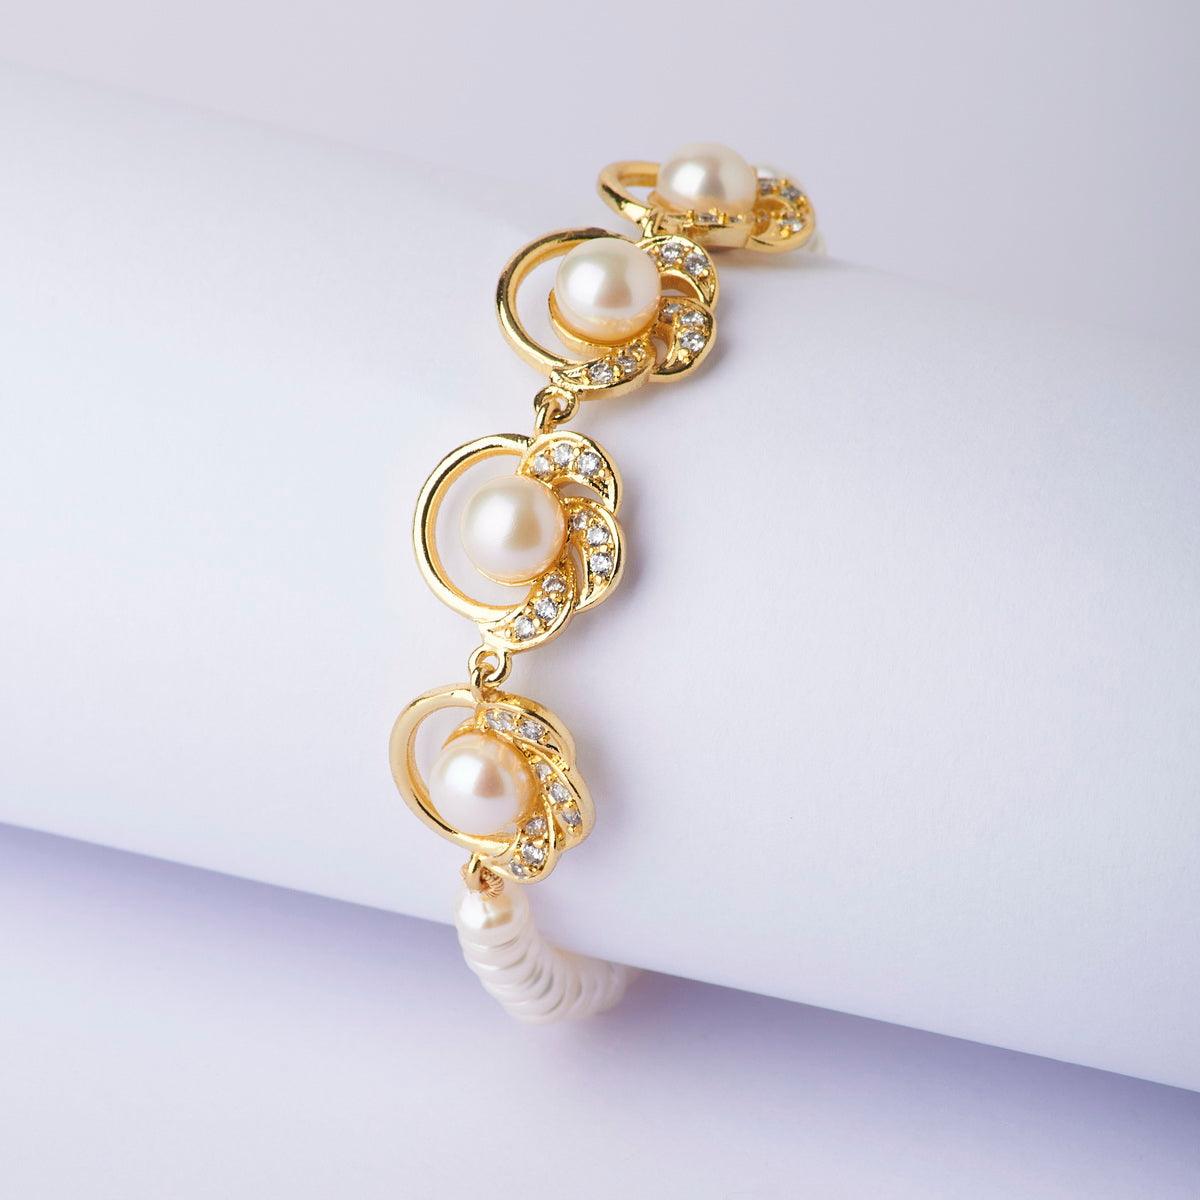 Floral Real Pearl Bracelet - Chandrani Pearls